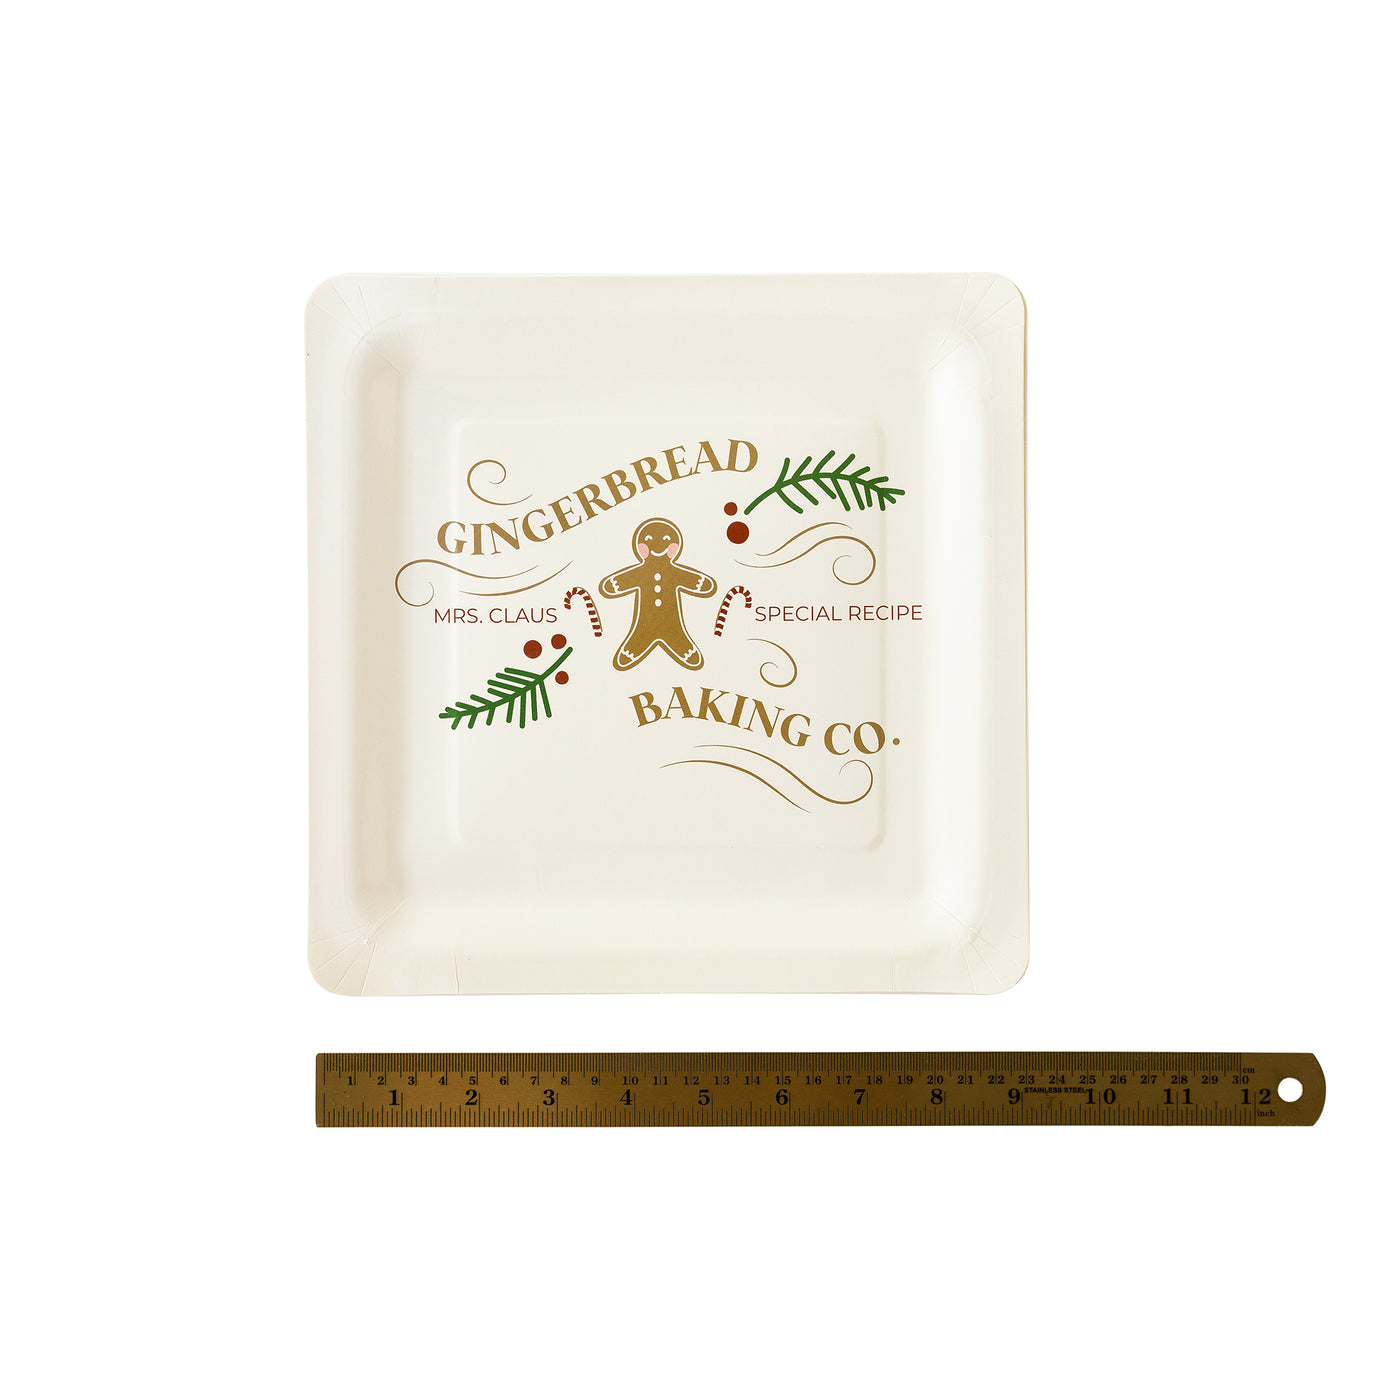 PLTS392C - Gingerbread Brand Paper Plate